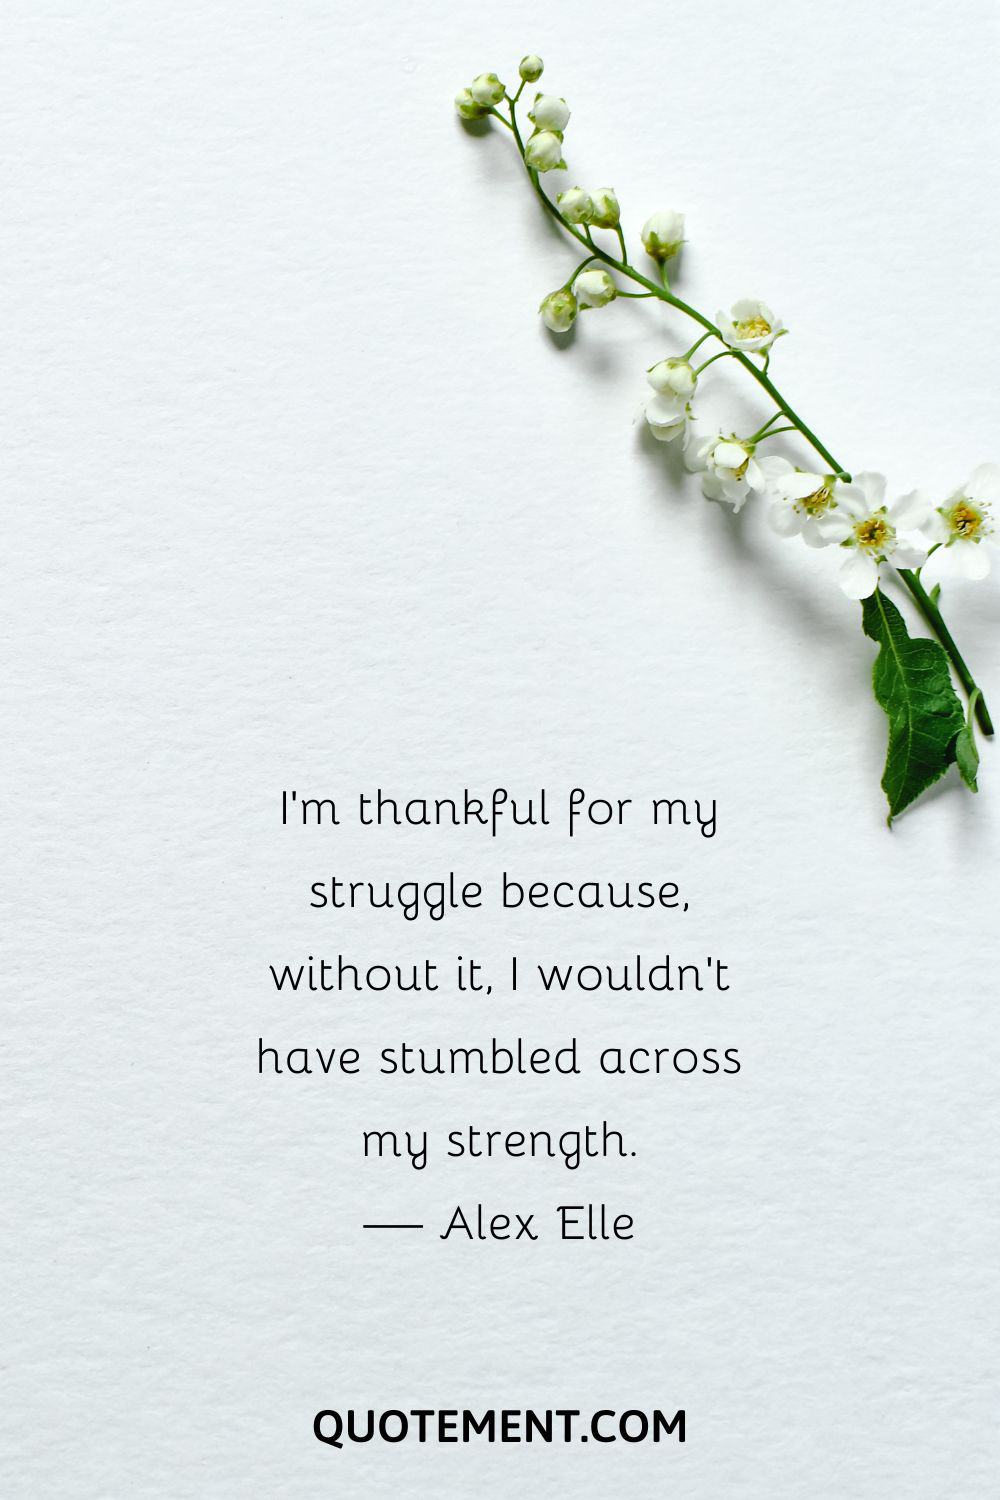 I’m thankful for my struggle because, without it, I wouldn’t have stumbled across my strength